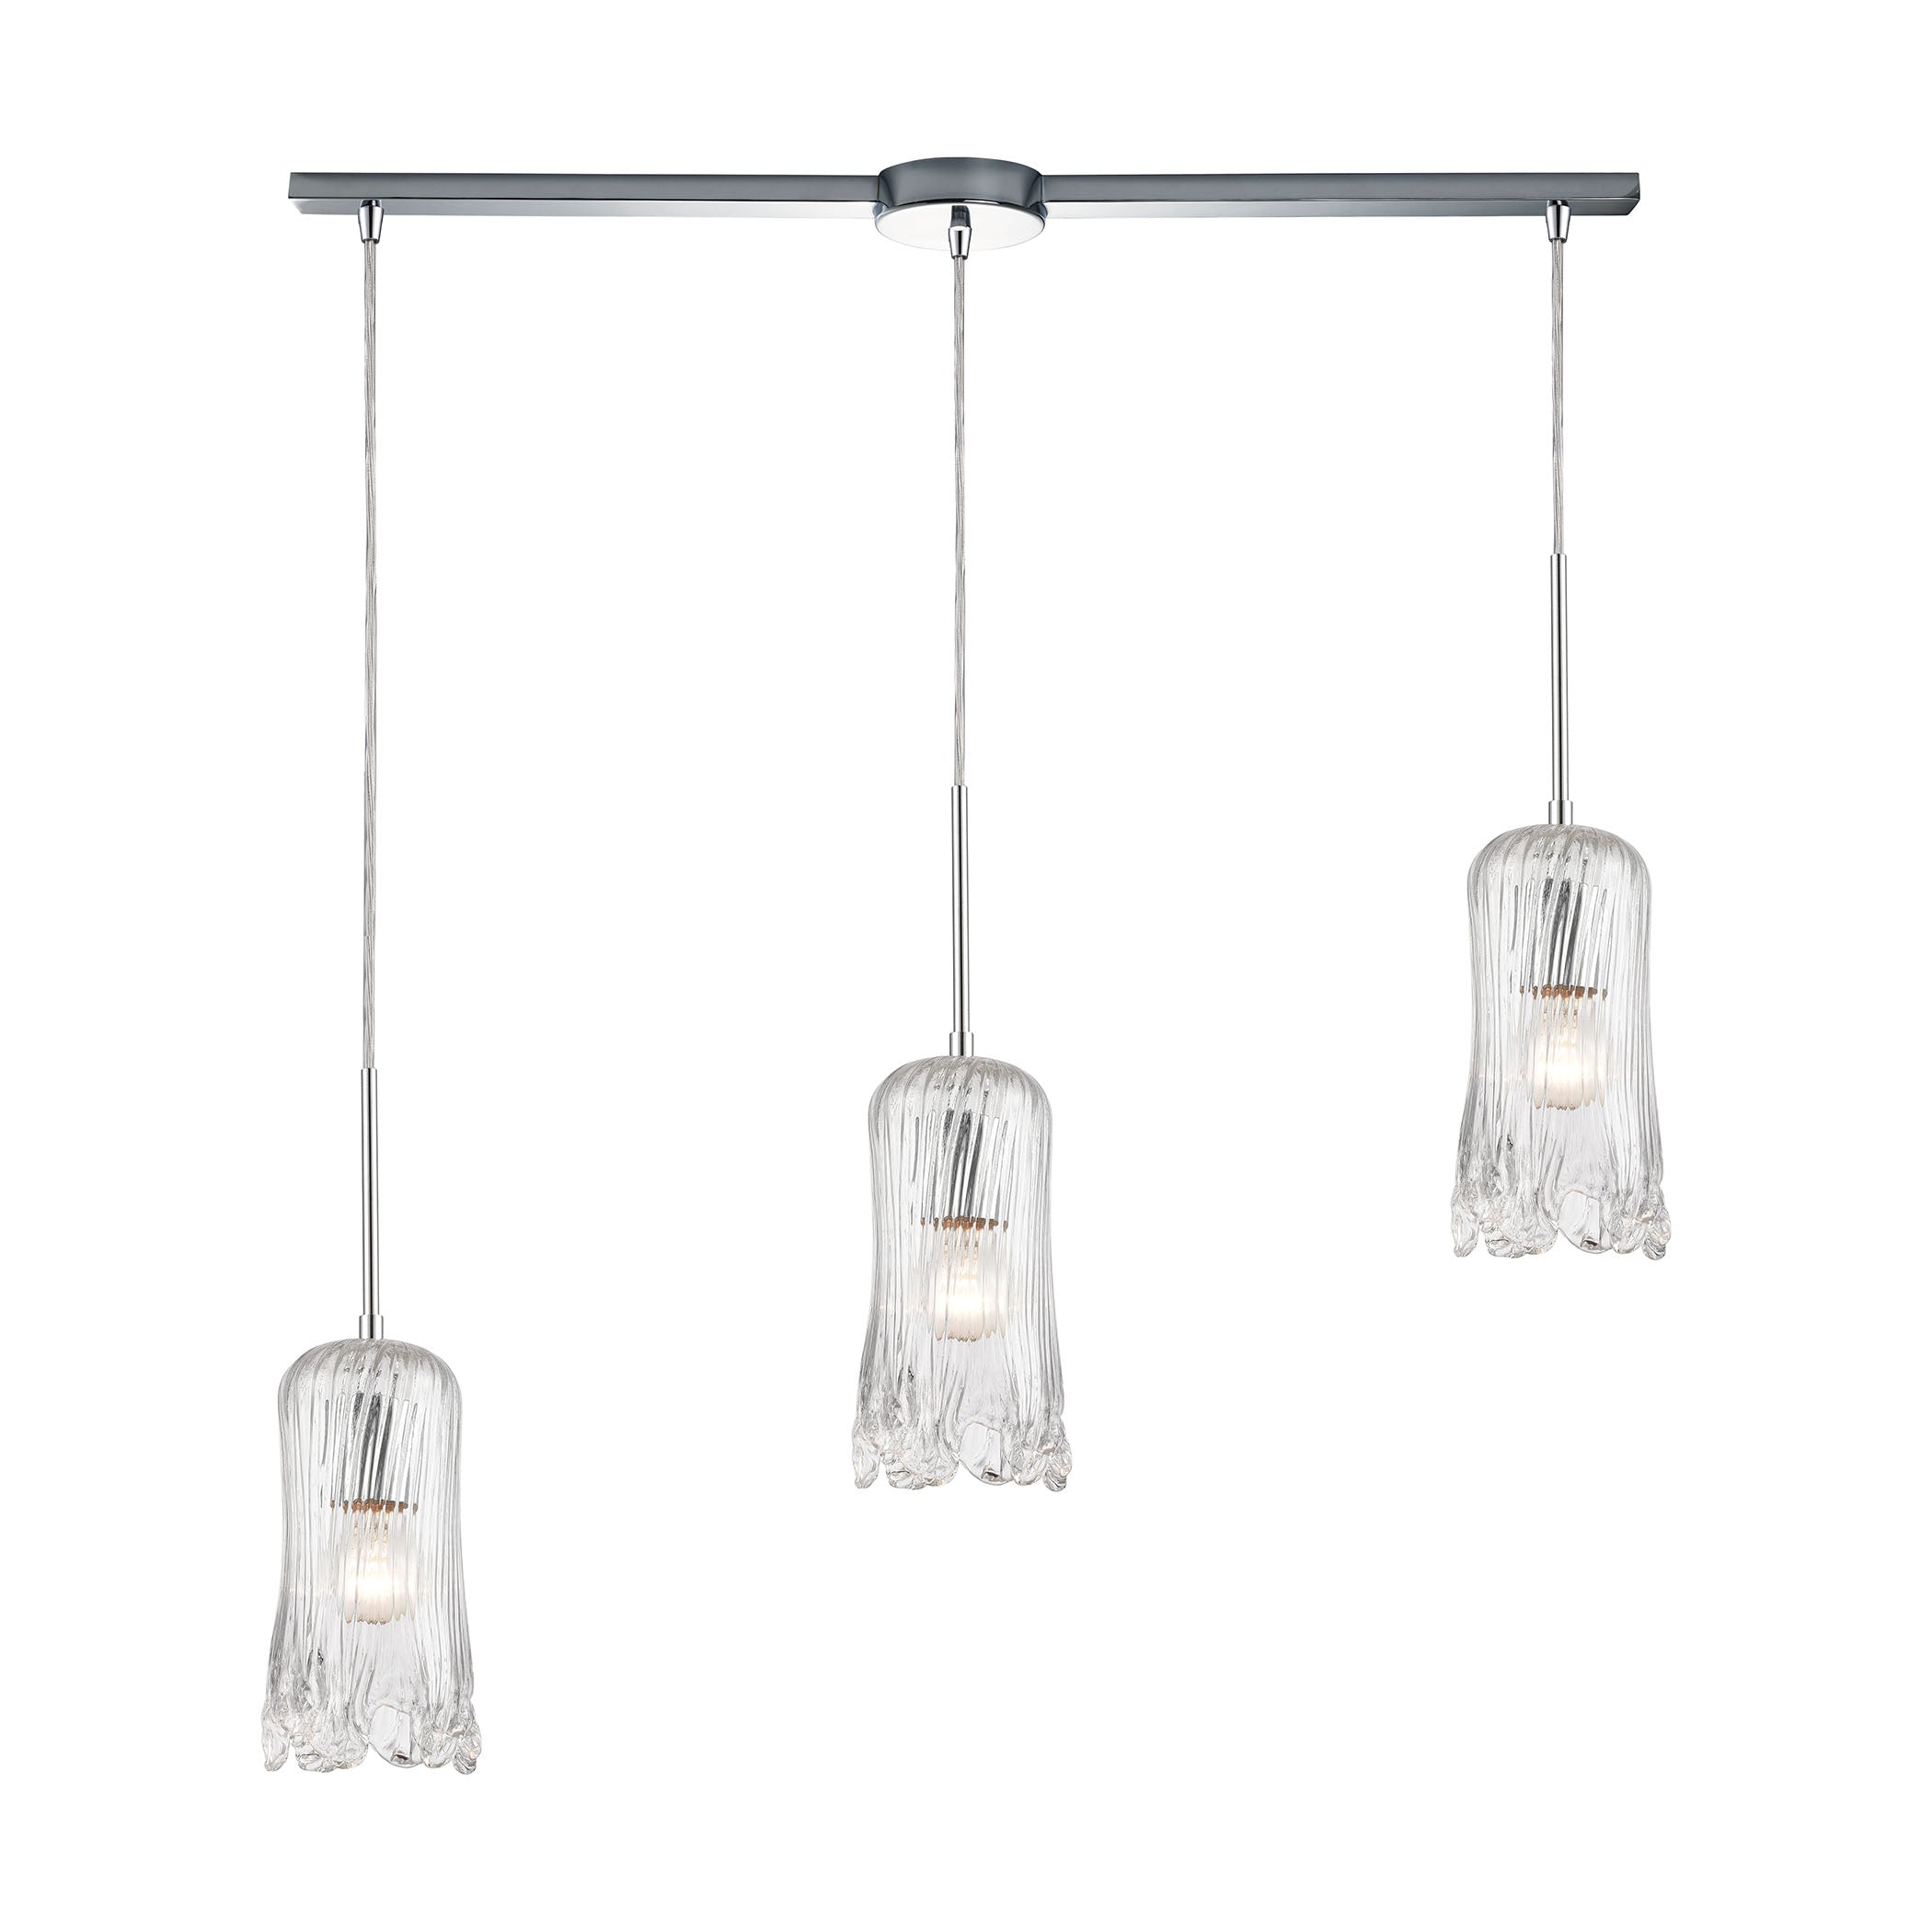 ELK Lighting 21165/3L Hand Formed Glass 3-Light Linear Mini Pendant Fixture in Chrome with Clear Hand-formed Glass